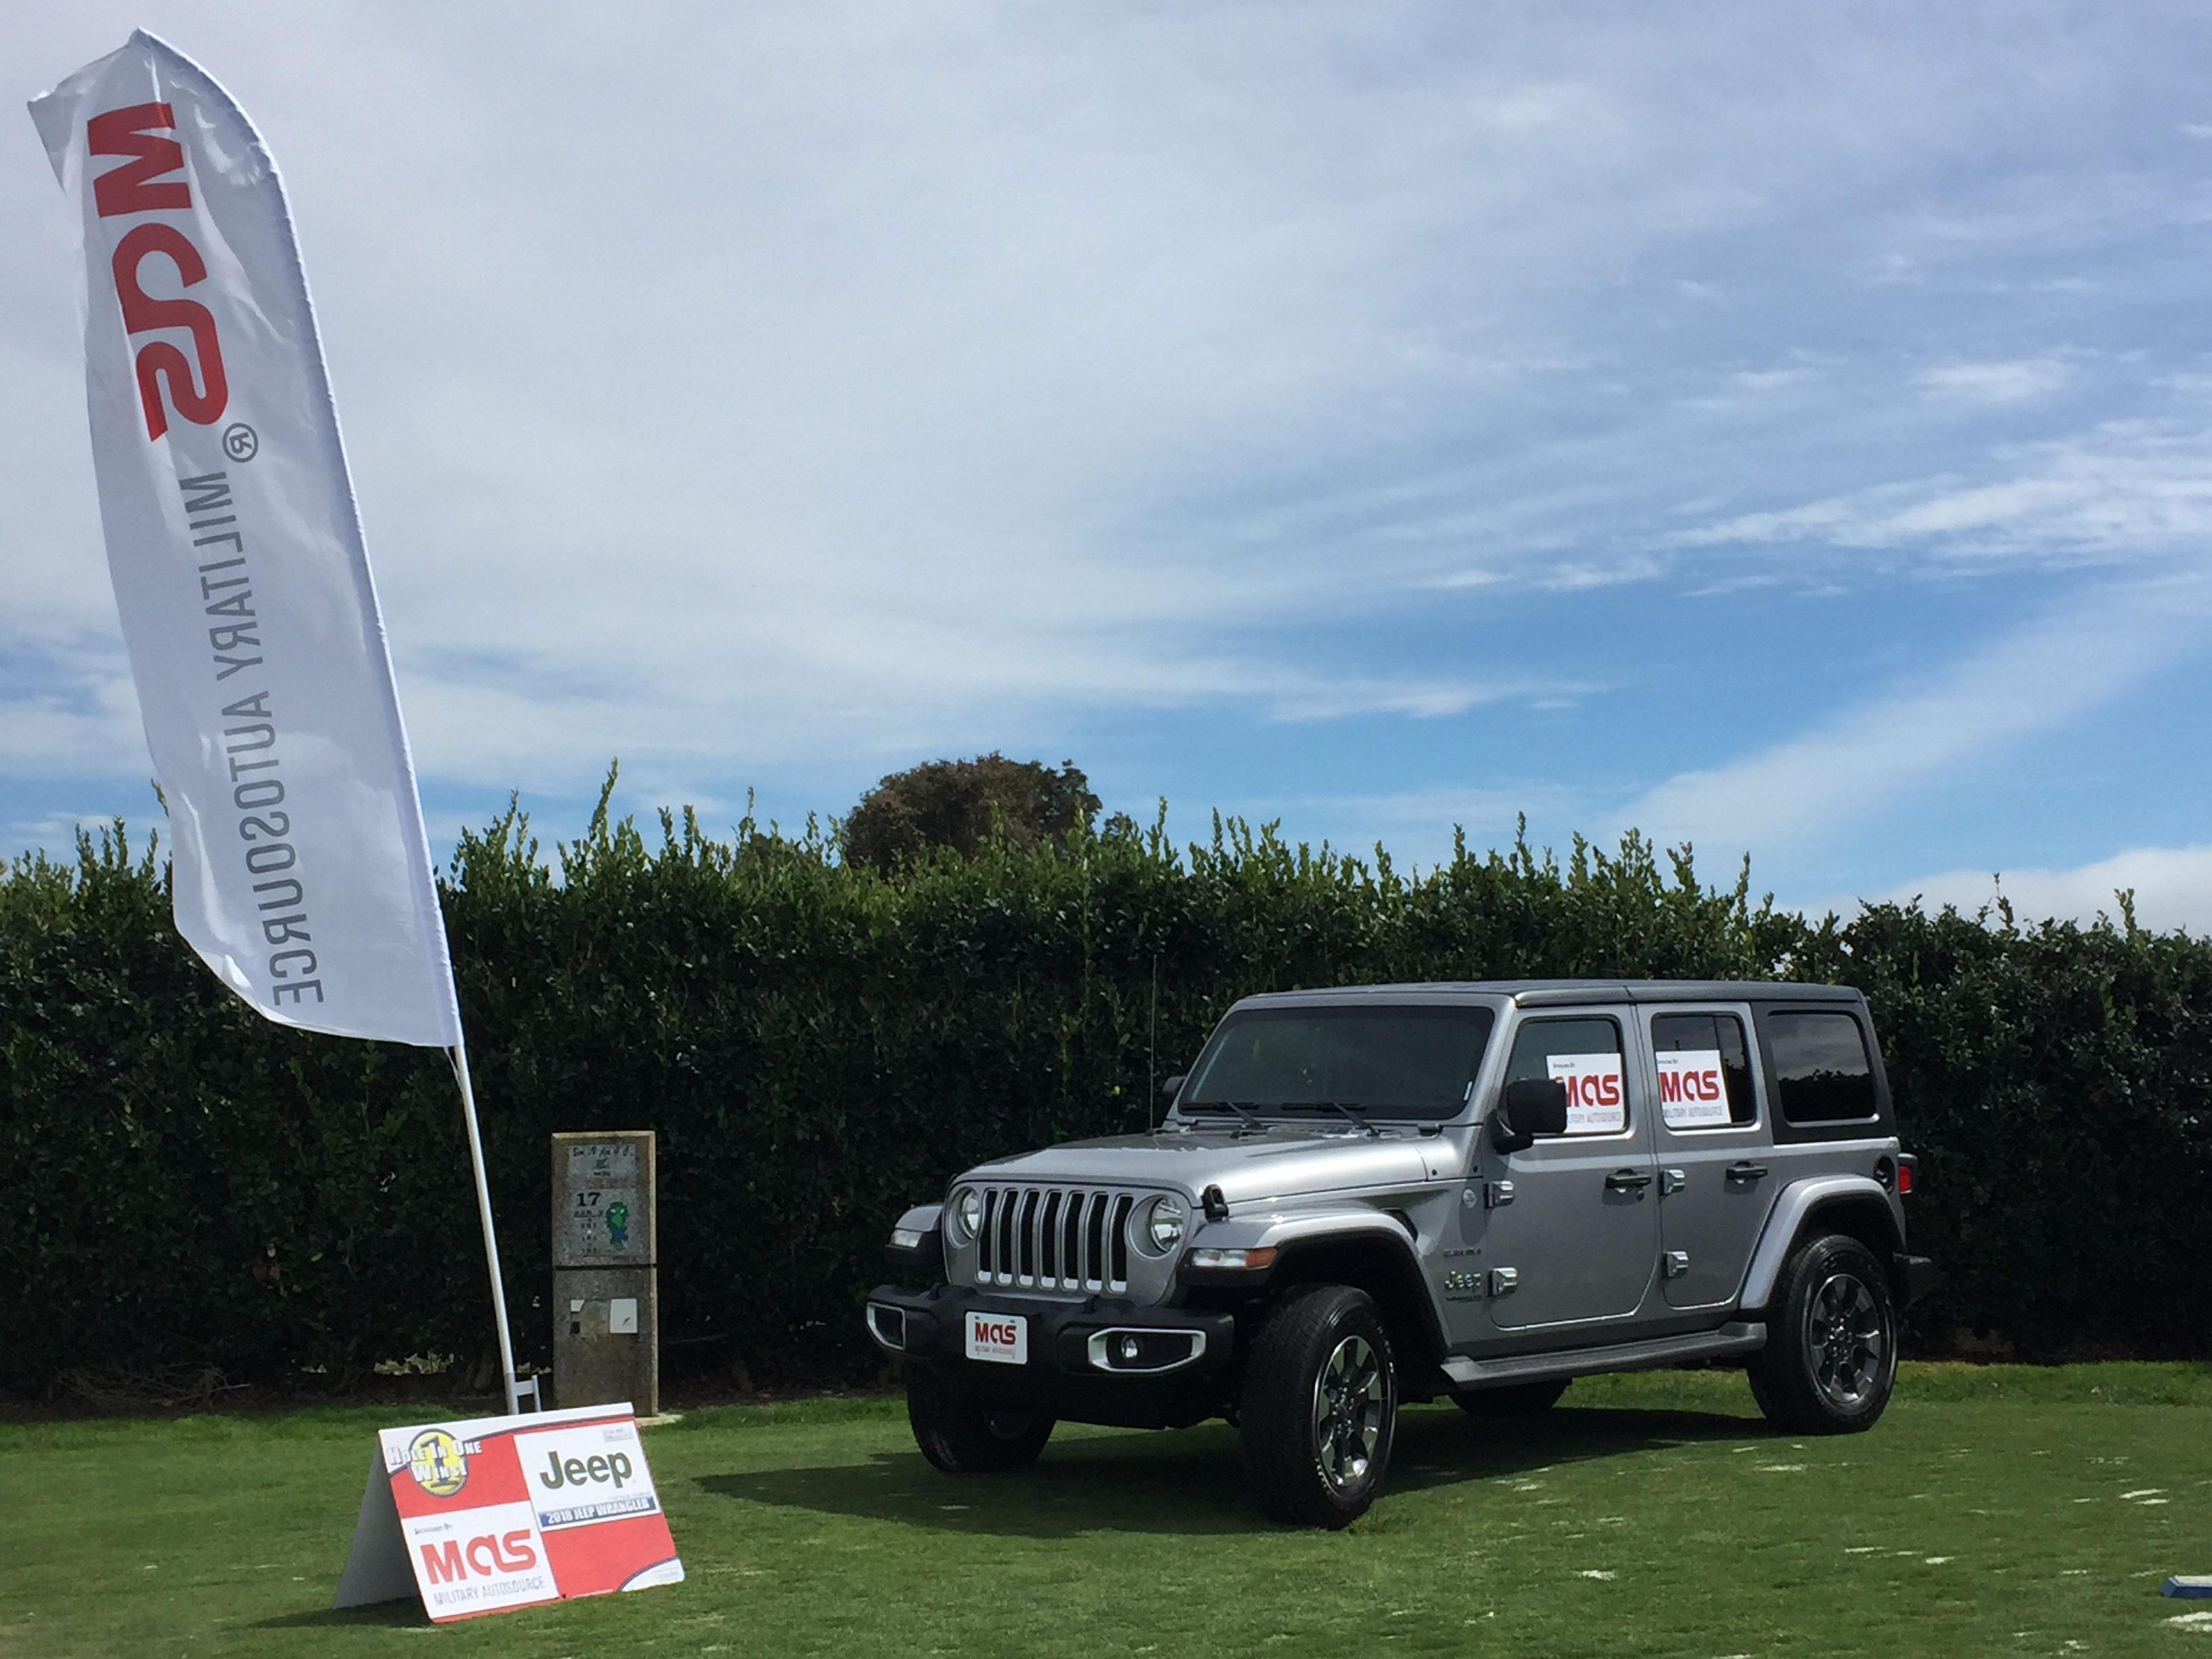 Military AutoSource Sponsors $50k Hole-In-One for Naval Families' Education  - Military AutoSource